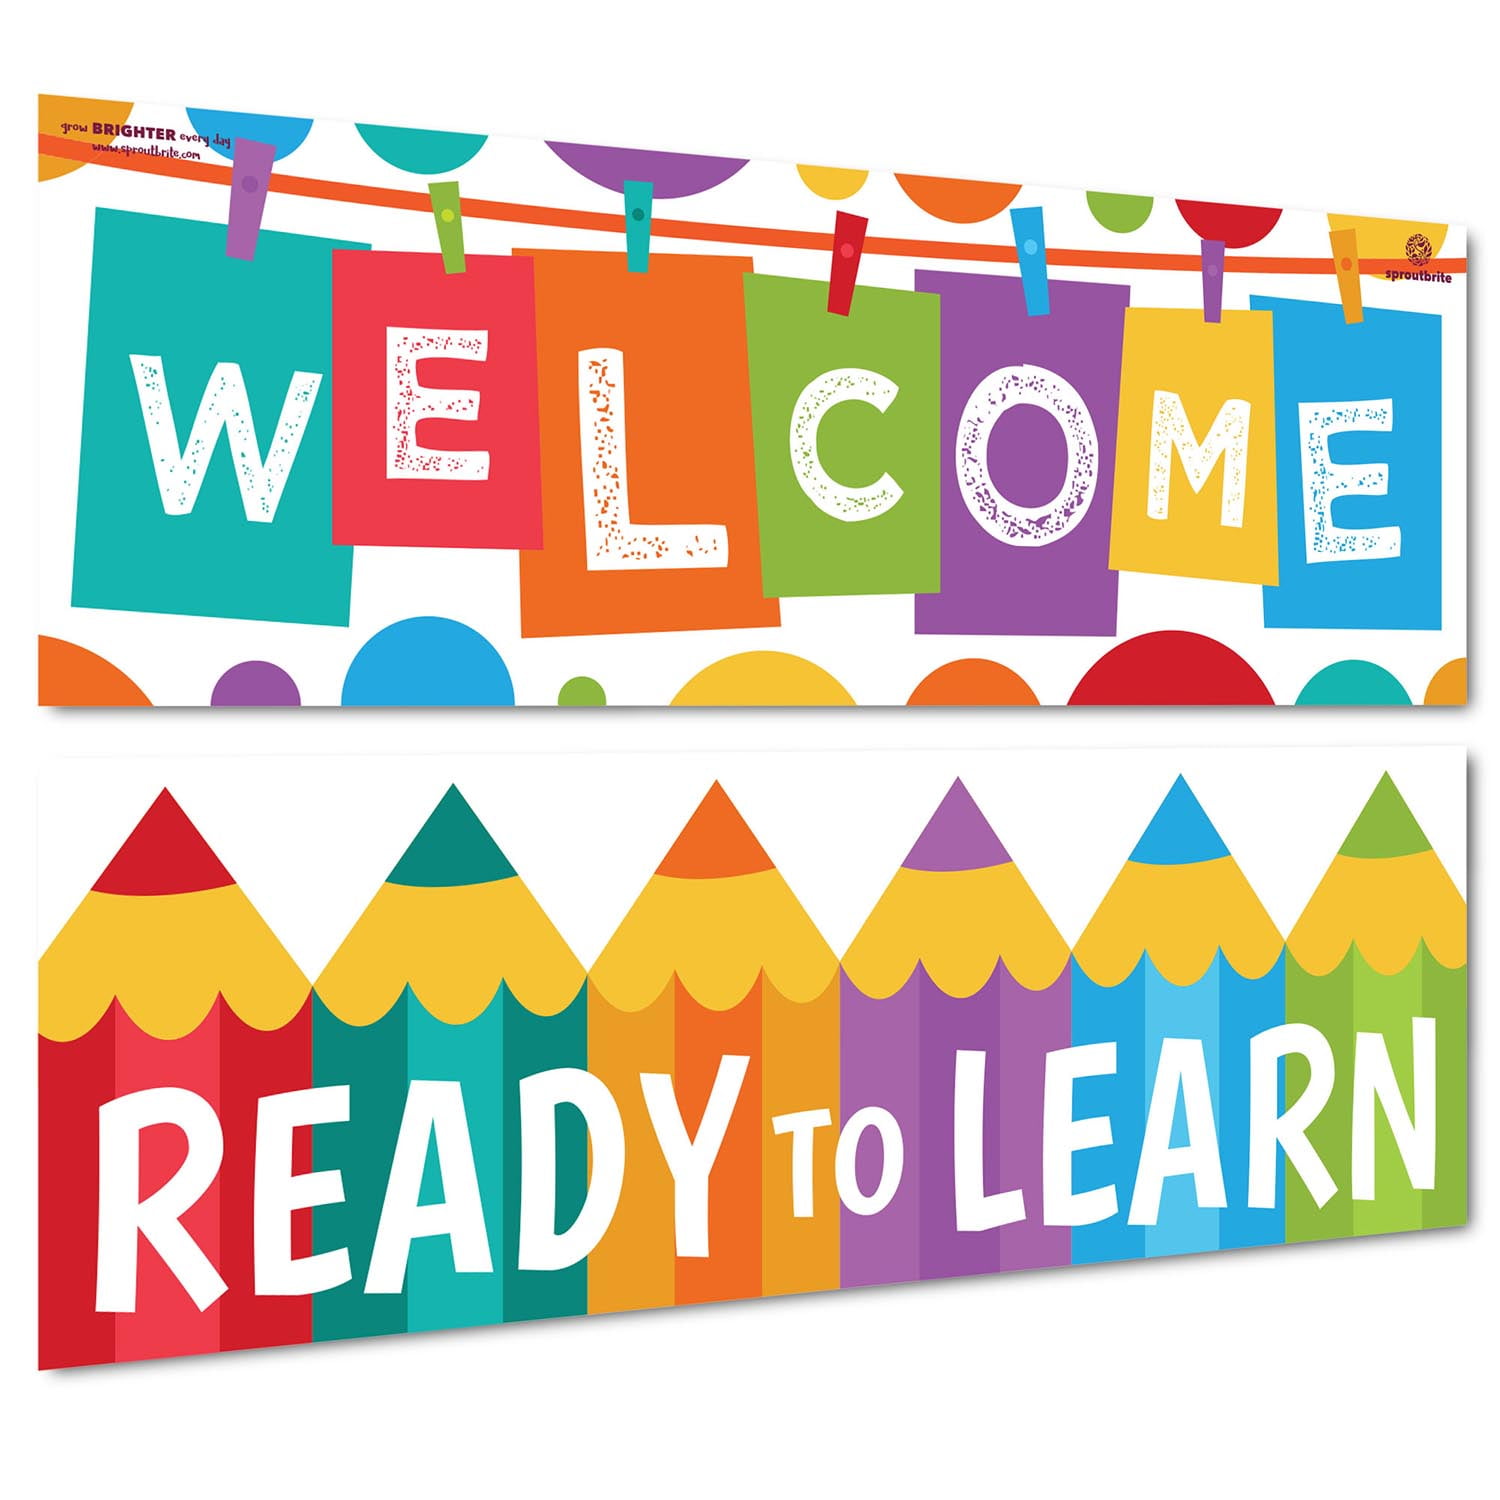 Everyone is Welcome Here Everyone Belongs Chillake 2 Pack Welcome Banners for Classroom Decorations,Inspirational Motivational Classroom Decor Banner and Wall Decor for School/Teacher/Students 